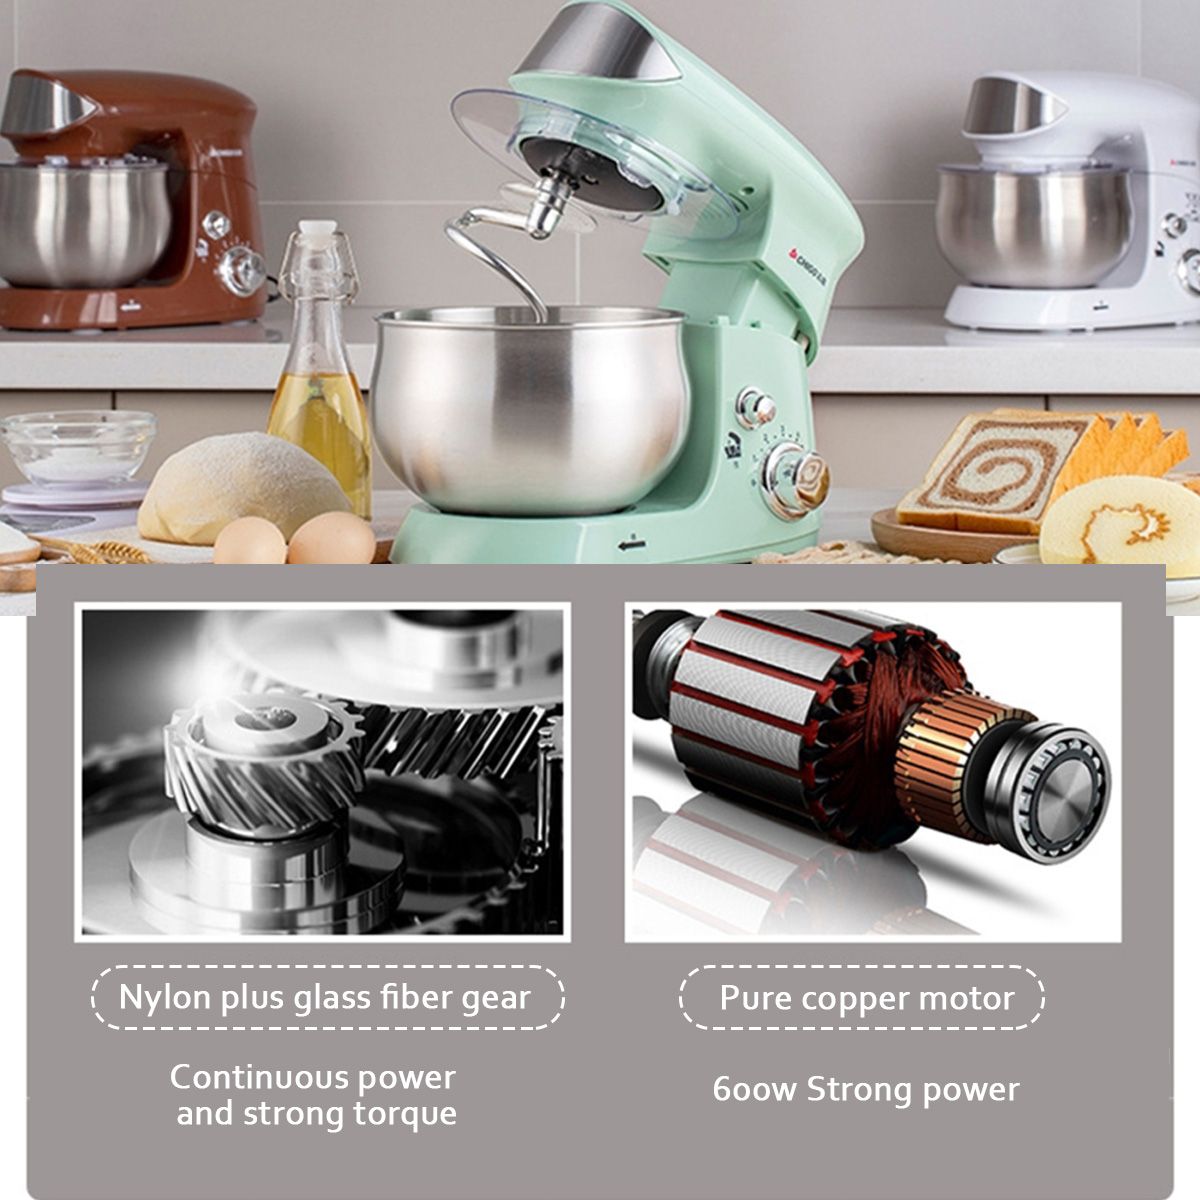 220V-35L-Stand-Mixer-Mixing-Machine-Electric-Cake-Beater-Maker-Dough-Hook-Whisk-6-Speed-1756056